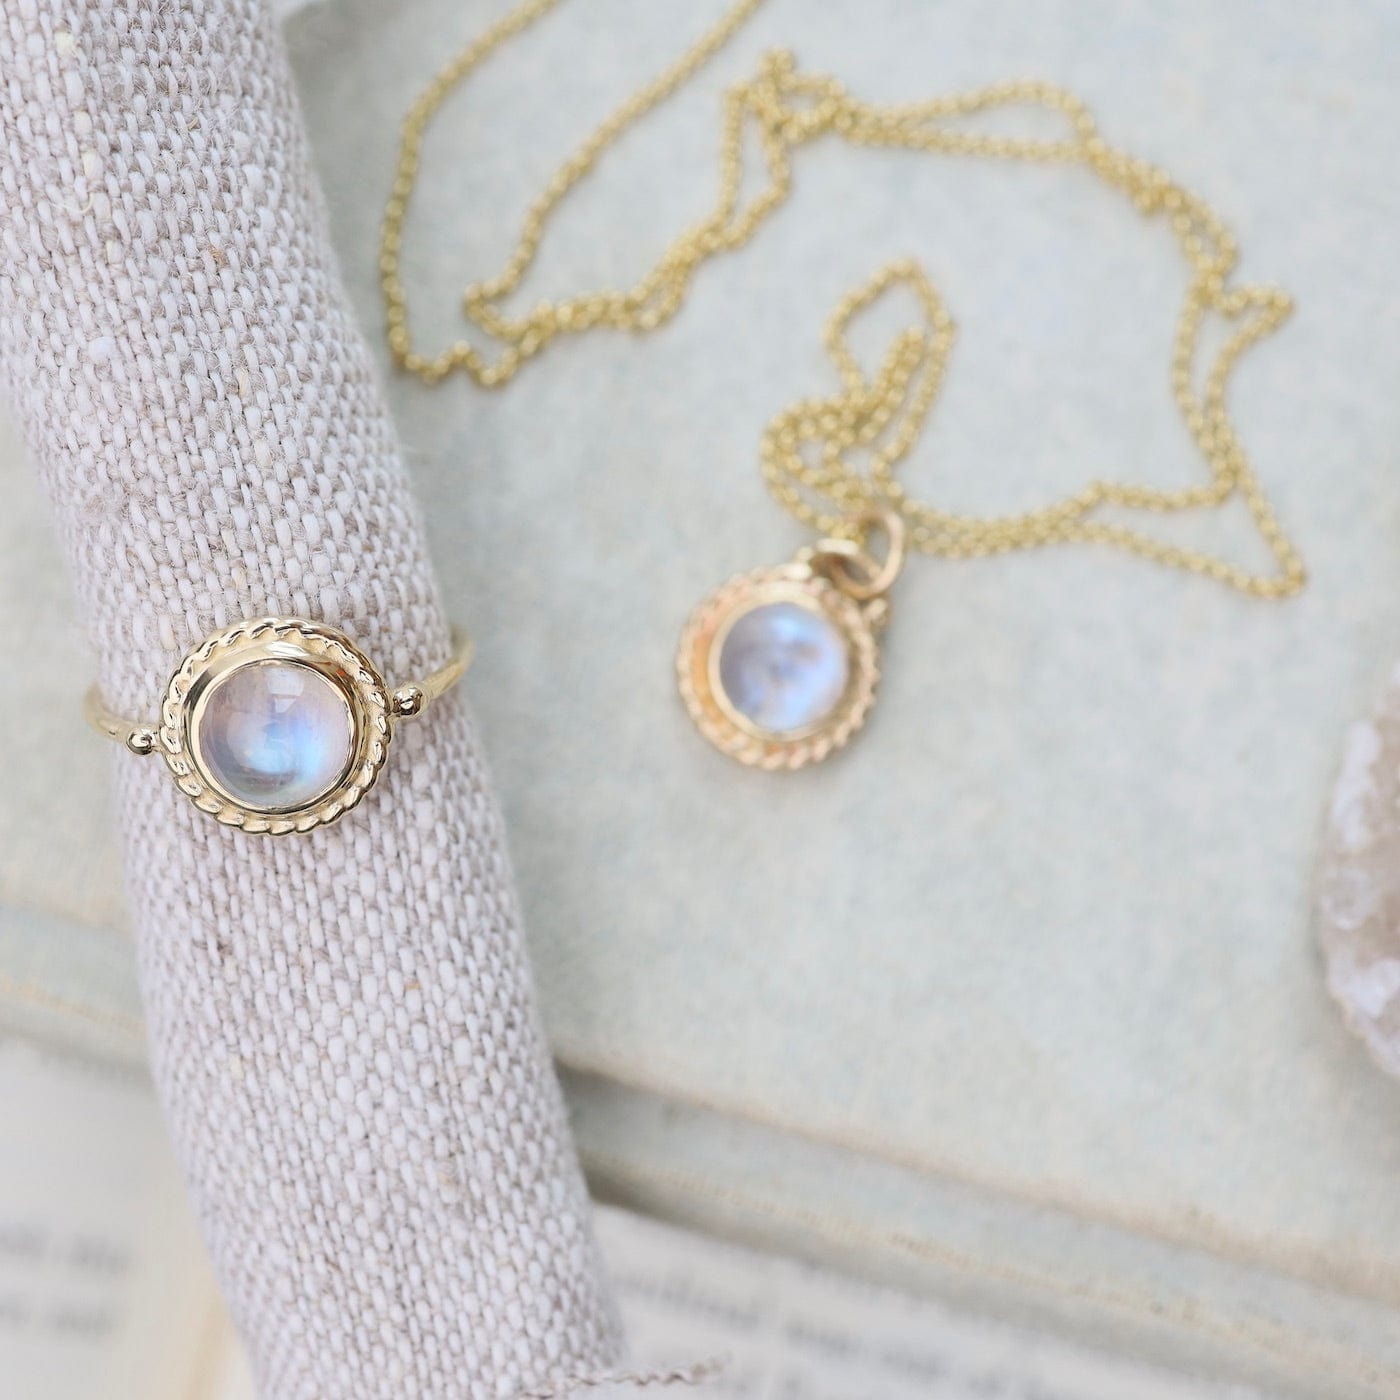 NKL-14K Gold Antiquarian Necklace with Moonstone